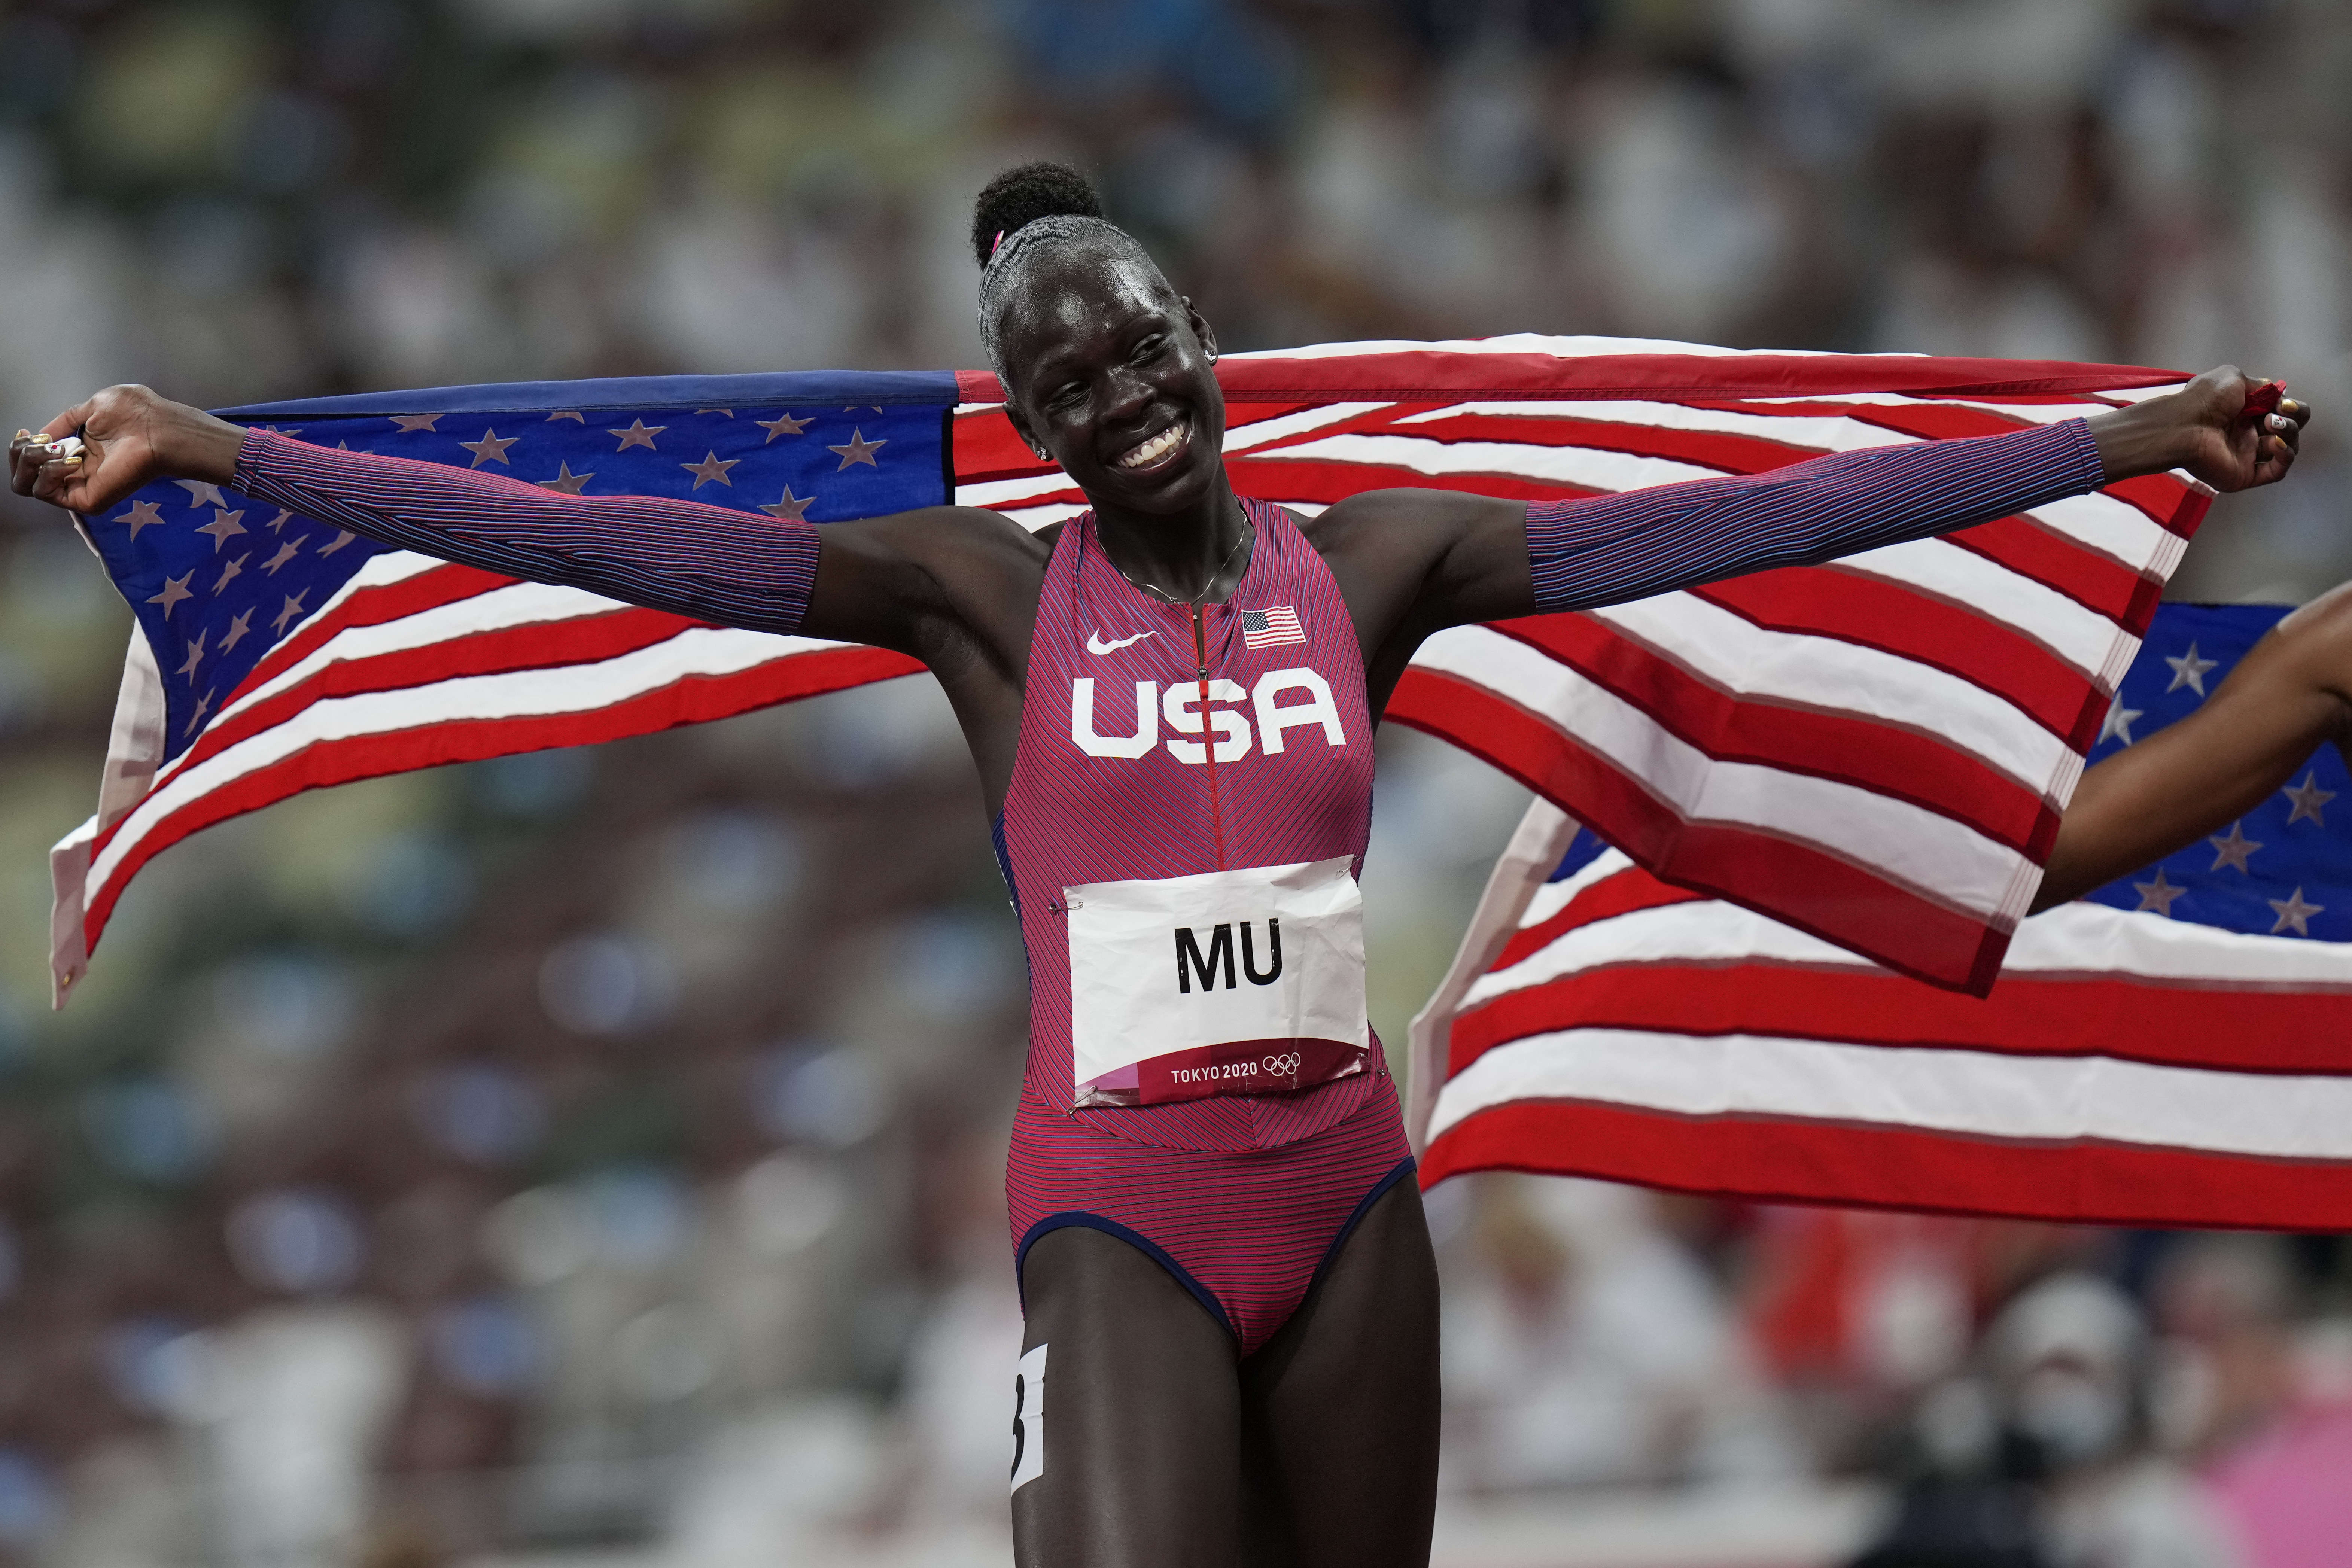 Olympic champion Athing Mu mulling whether to defend 800-meter world title  - Los Angeles Times